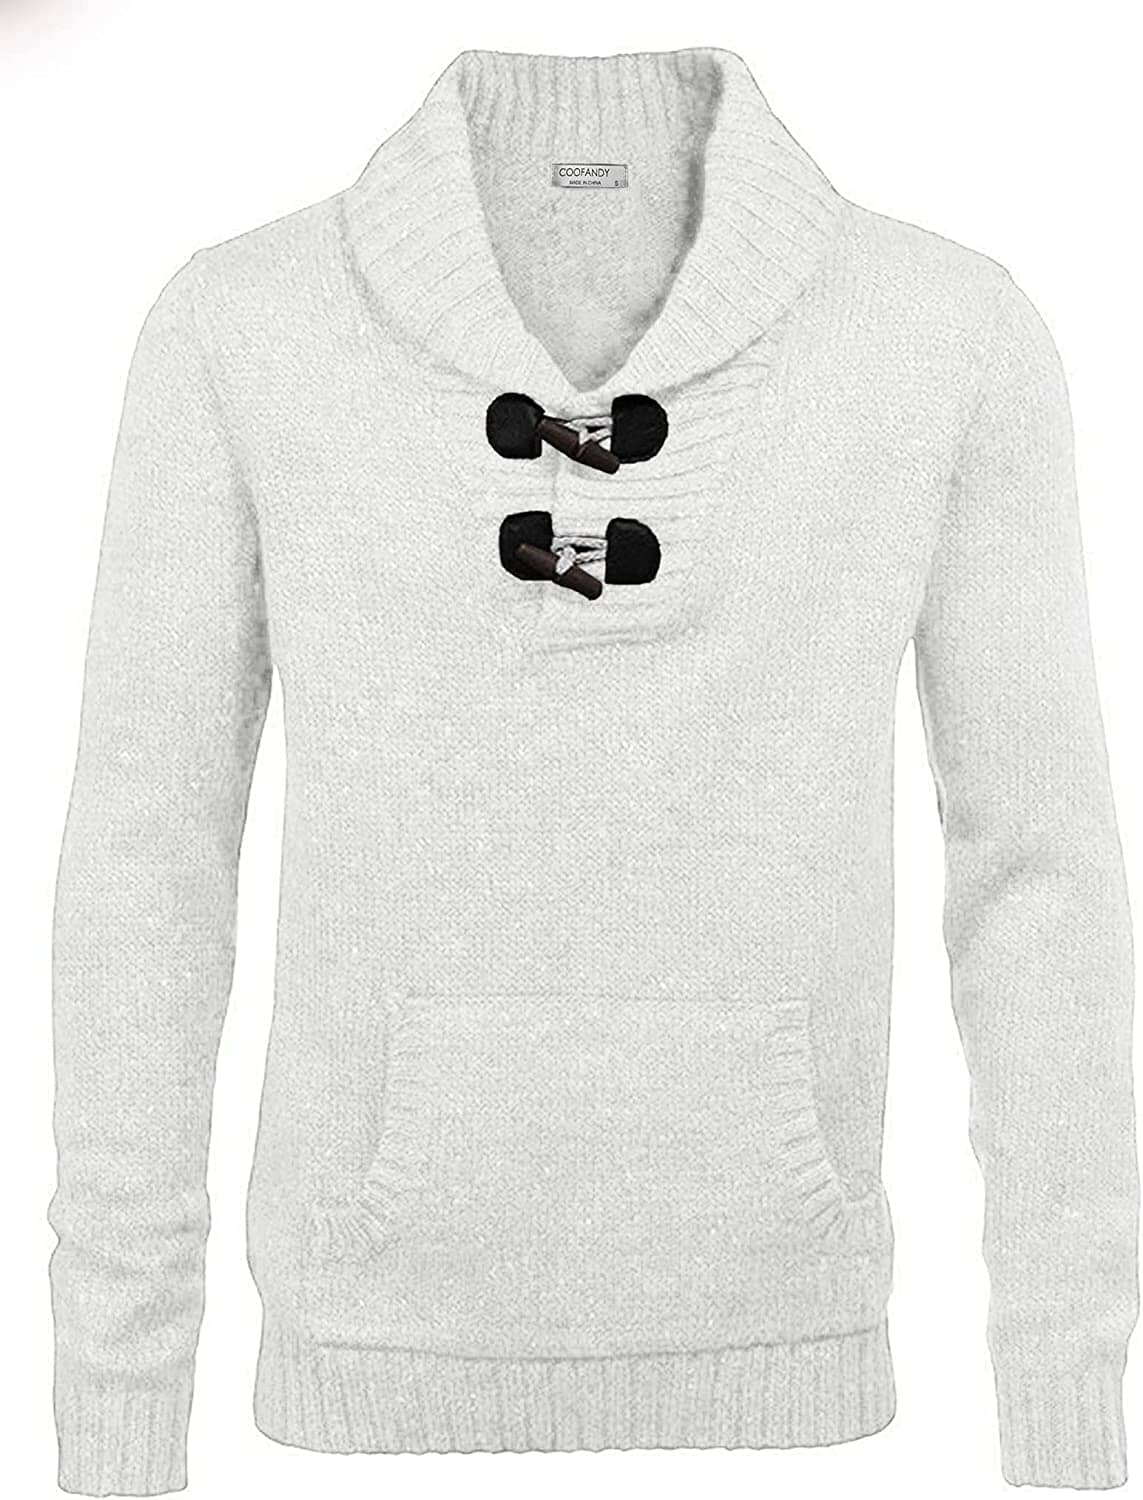 Shawl Collar Pullover Knit Sweaters with Pockets (US Only) Sweaters COOFANDY Store White S 